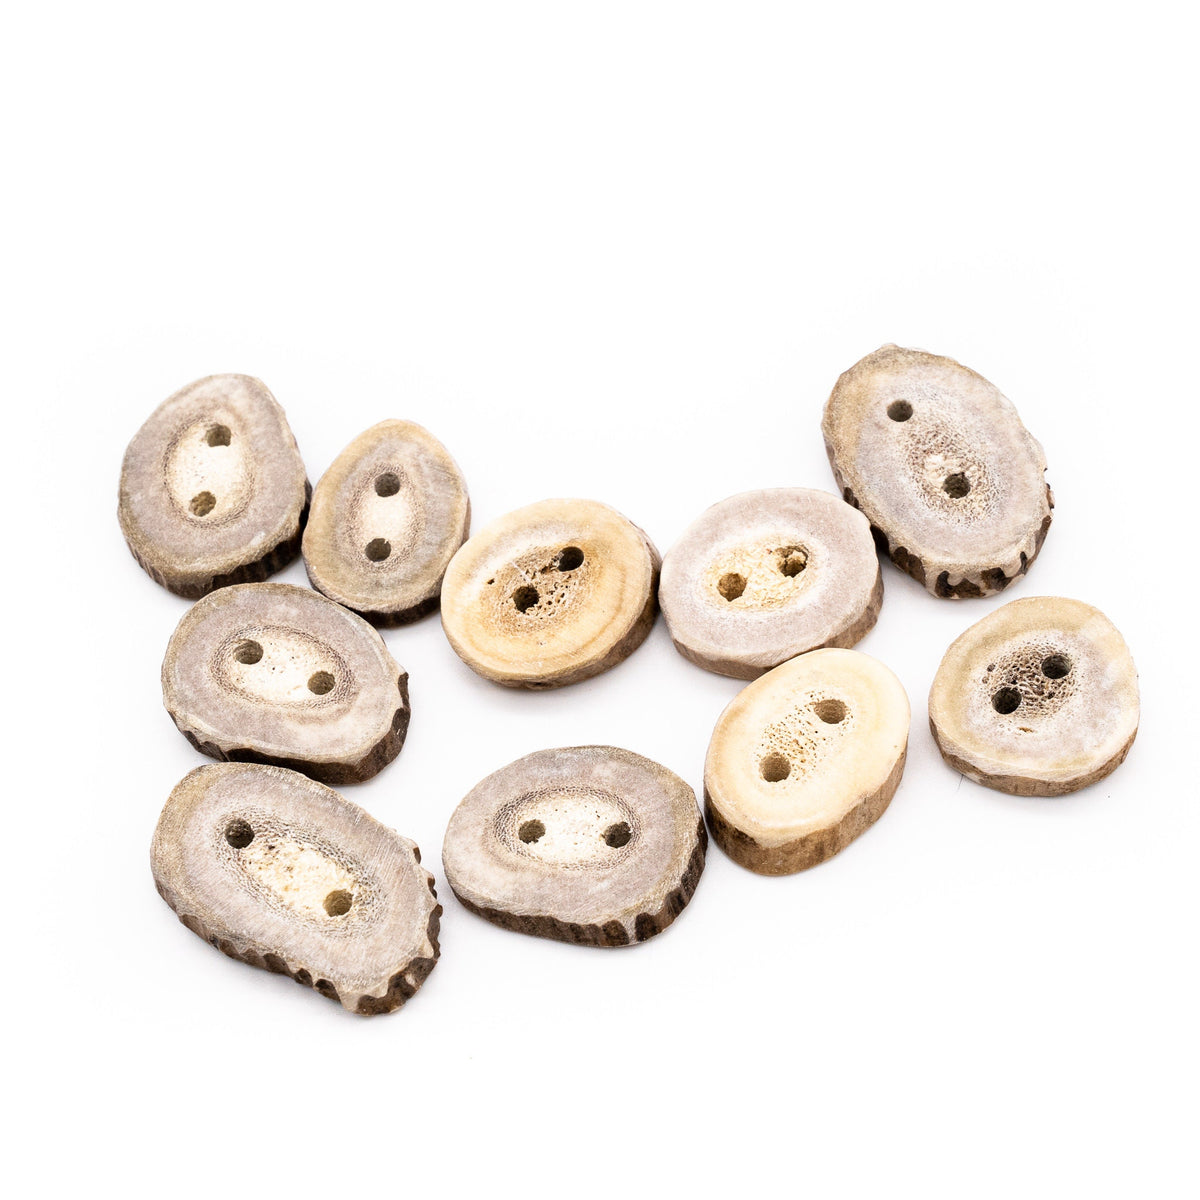 Large Deer Antler Buttons, 10 count - Antler For Crafts - Antler For Jewelry Making - Antler For Necklaces - Antler For Earrings